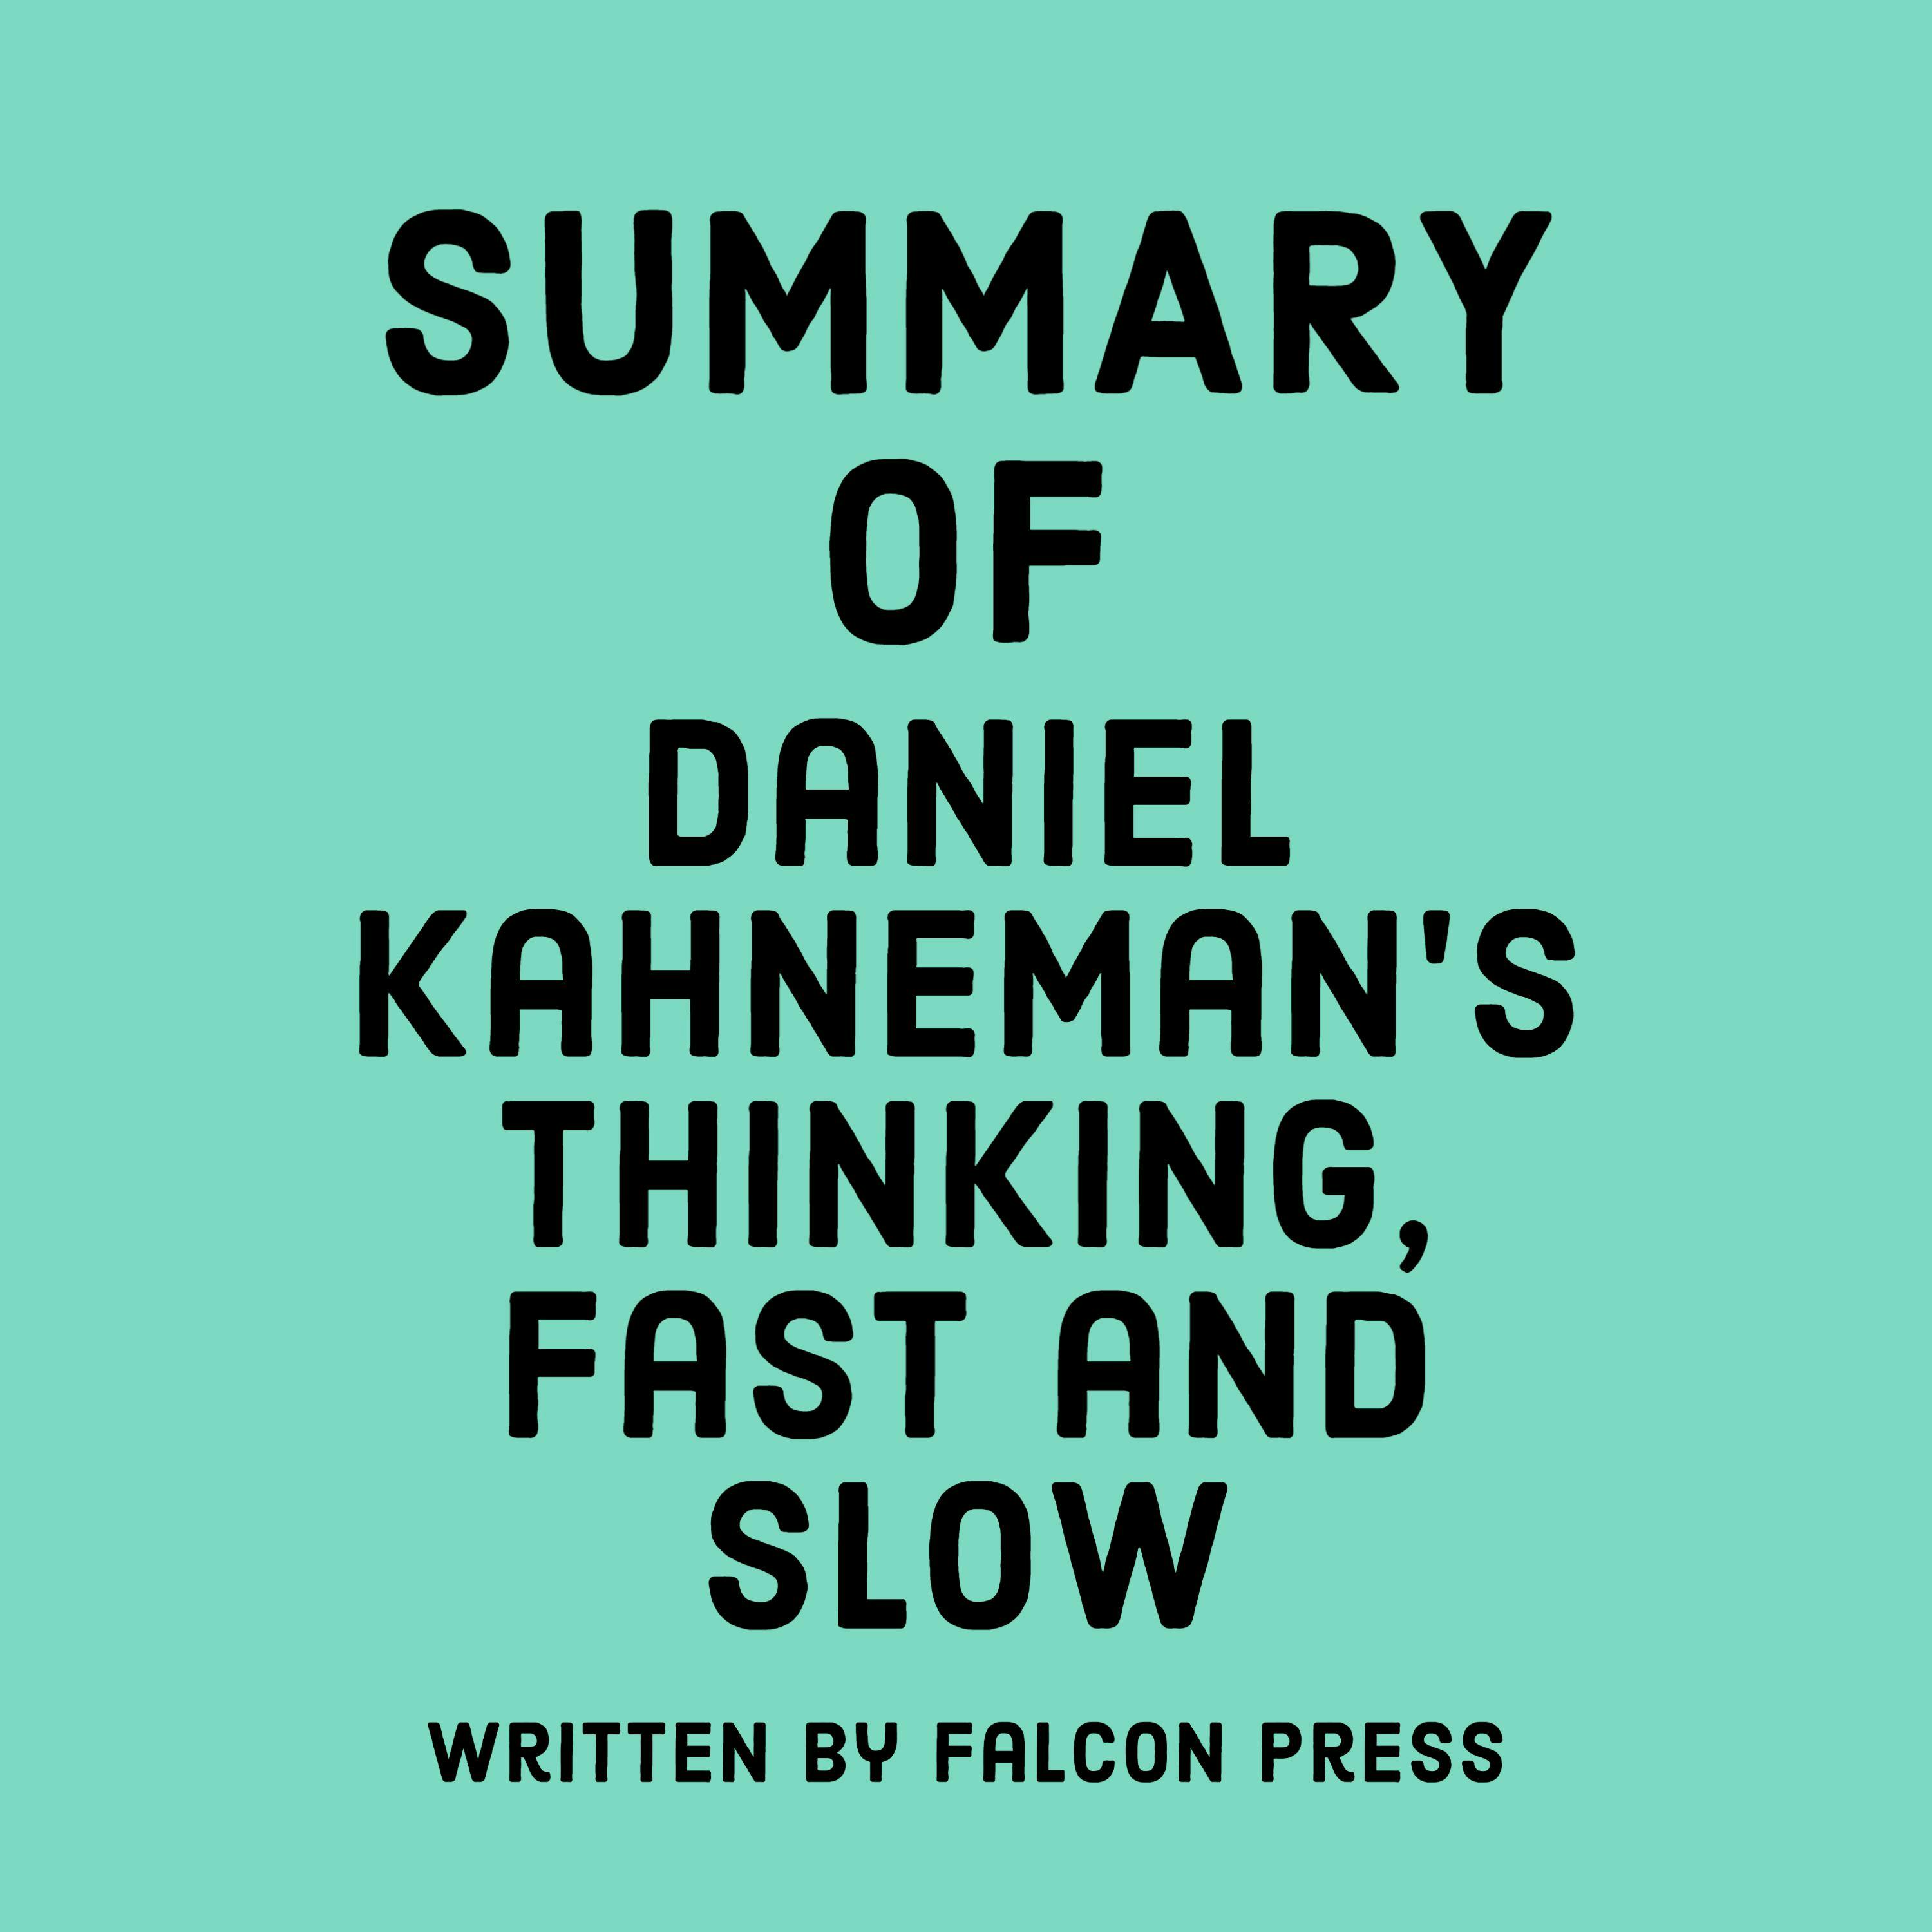 Summary of Daniel Kahneman’s Thinking, Fast and Slow - undefined